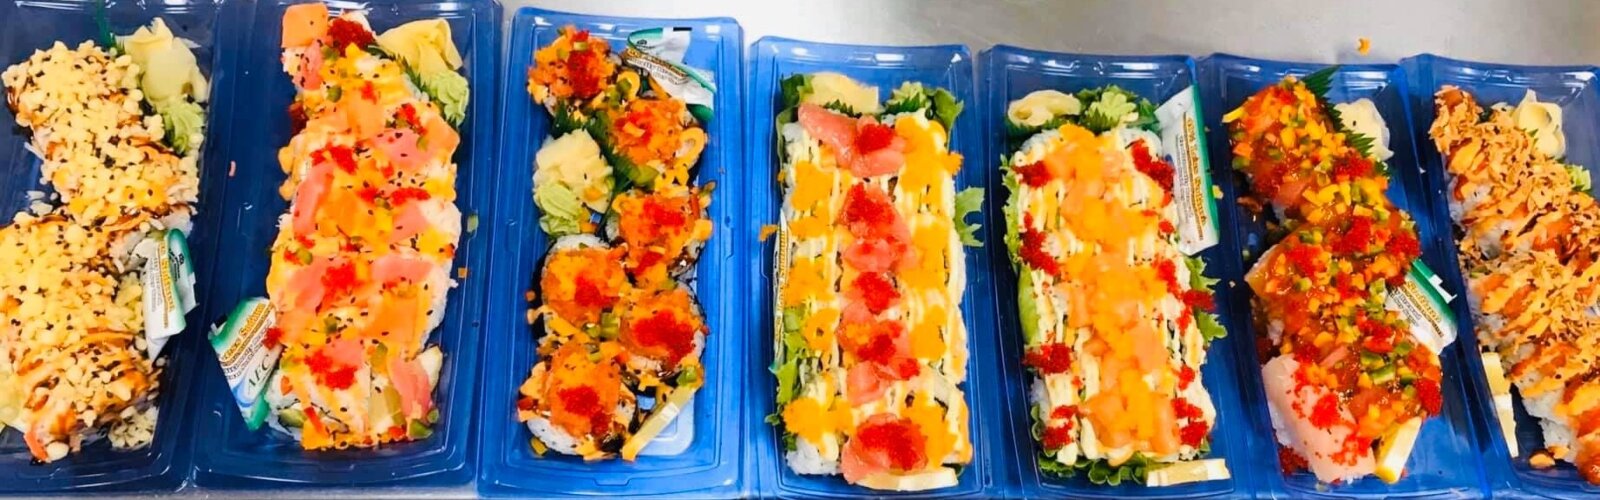 Sushi Hikari make a wide variety of made-to-order sushi and poke bowl dishes from their location in COhatch in Downtown Springfield.